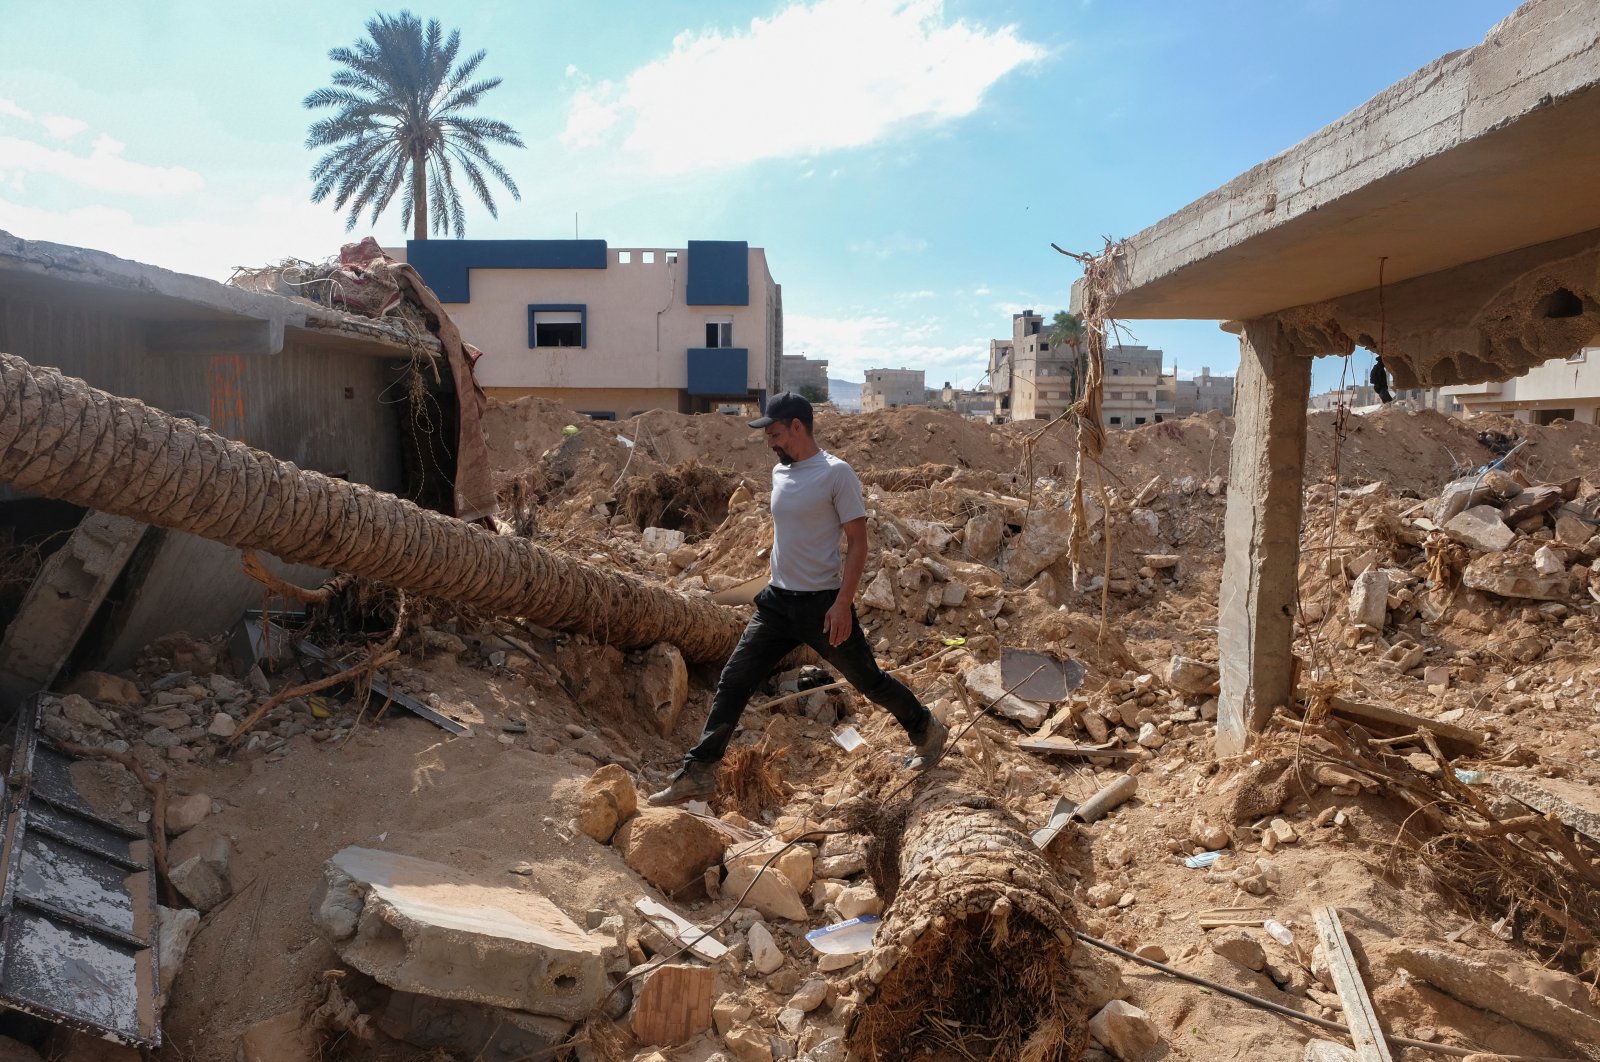 Libya reconstruction, relief hampered by political division: UN